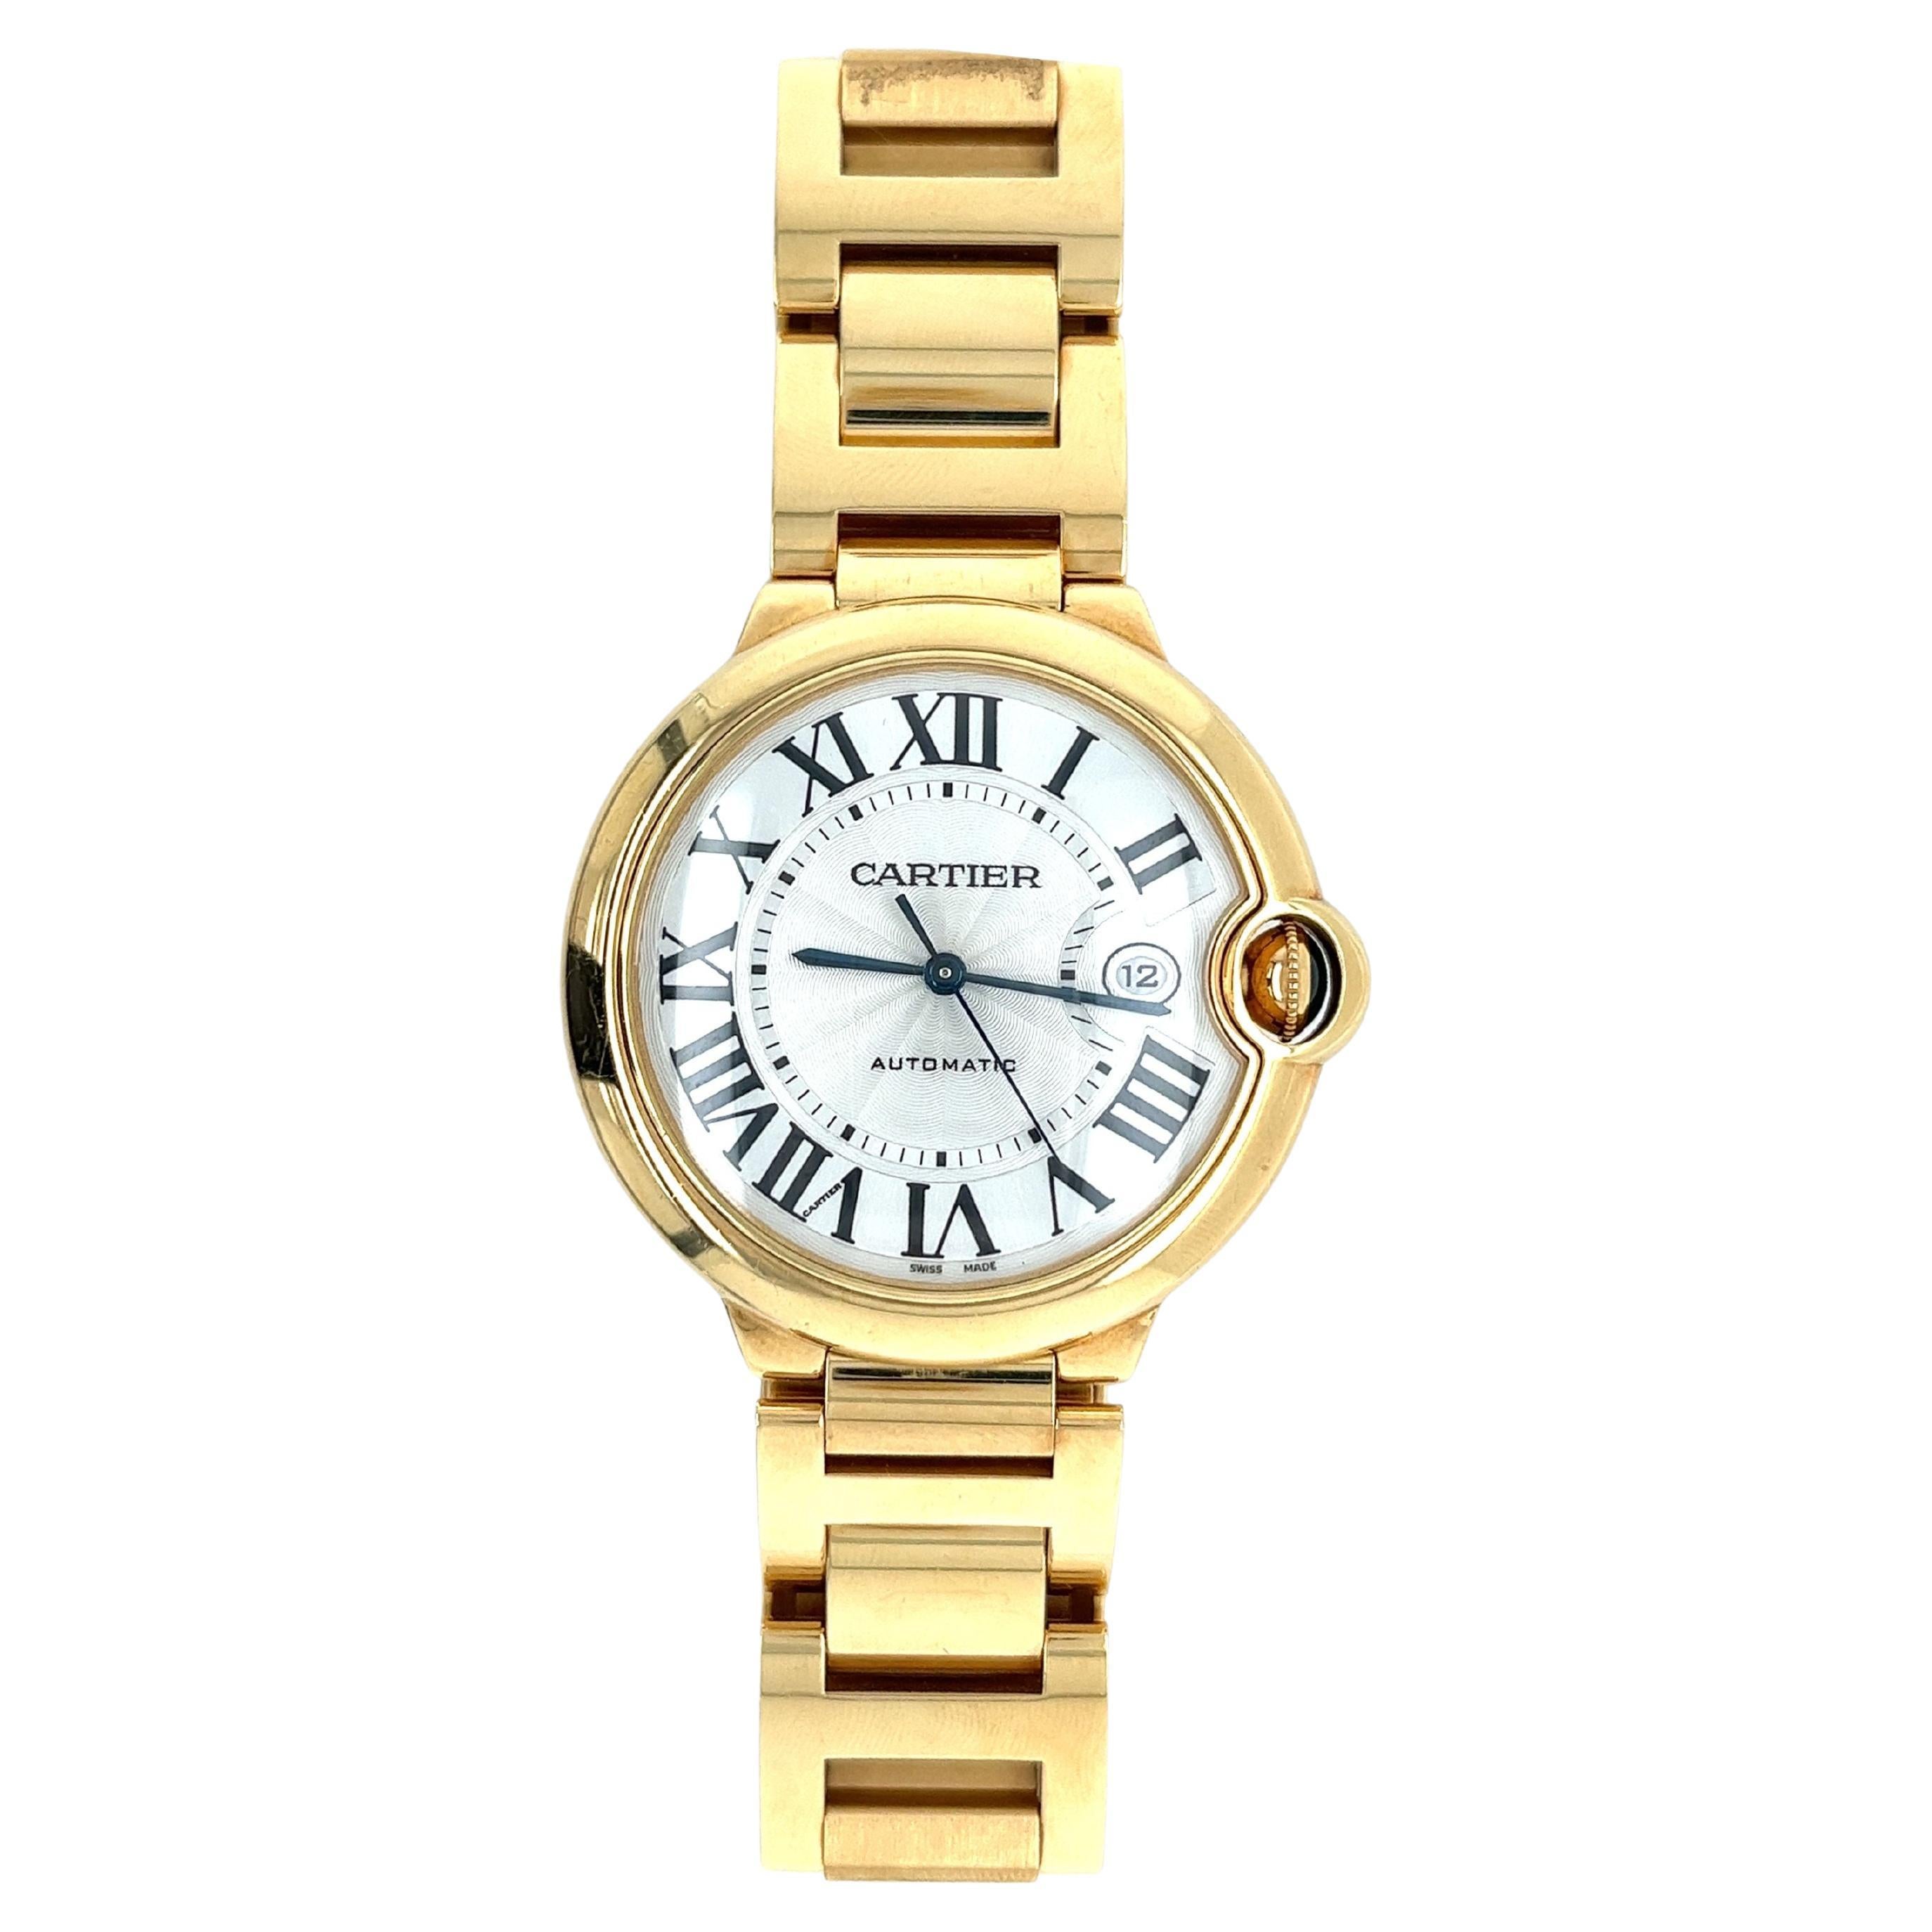 Cartier Ballon Bleu Jumbo Large Size Mens Watch in 18k Gold with Box/Papers For Sale